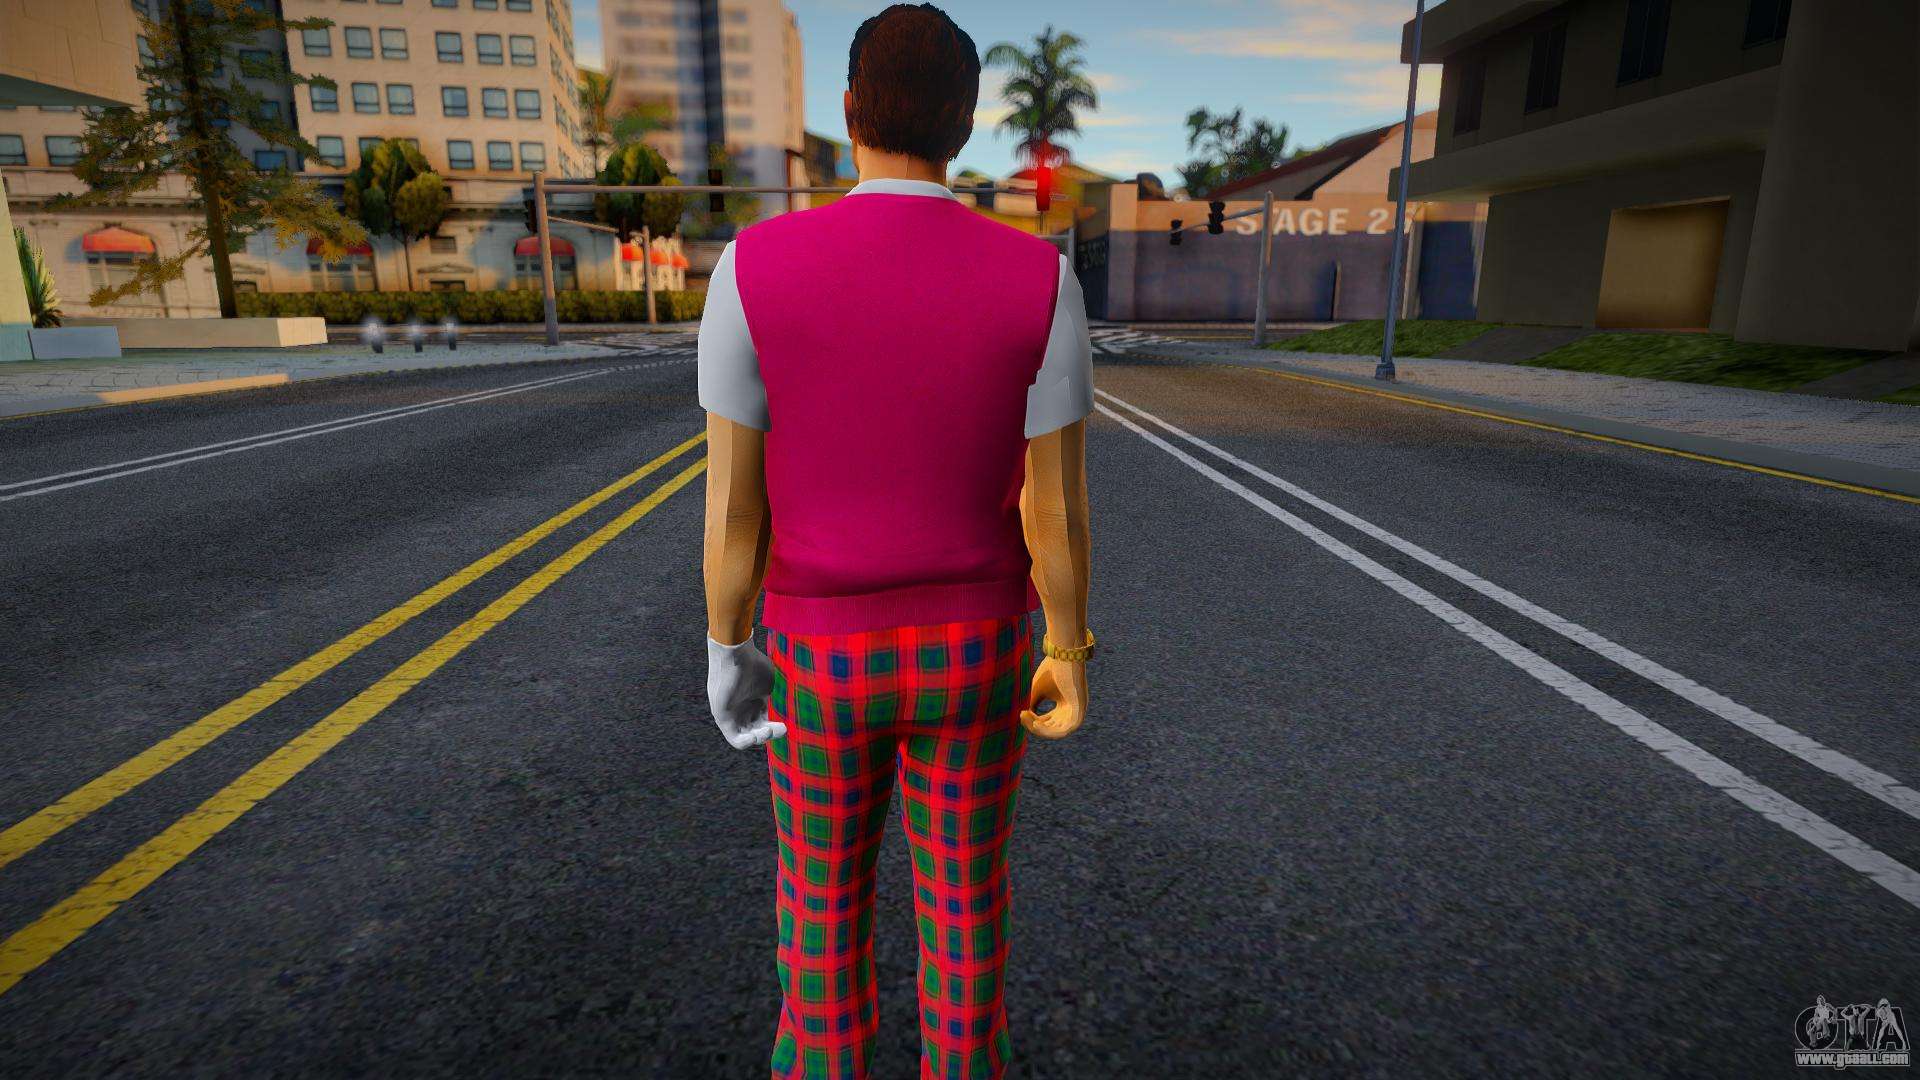 Tommy Vercetti HD Default Golfer Outfit DLC The for GTA San Andreas